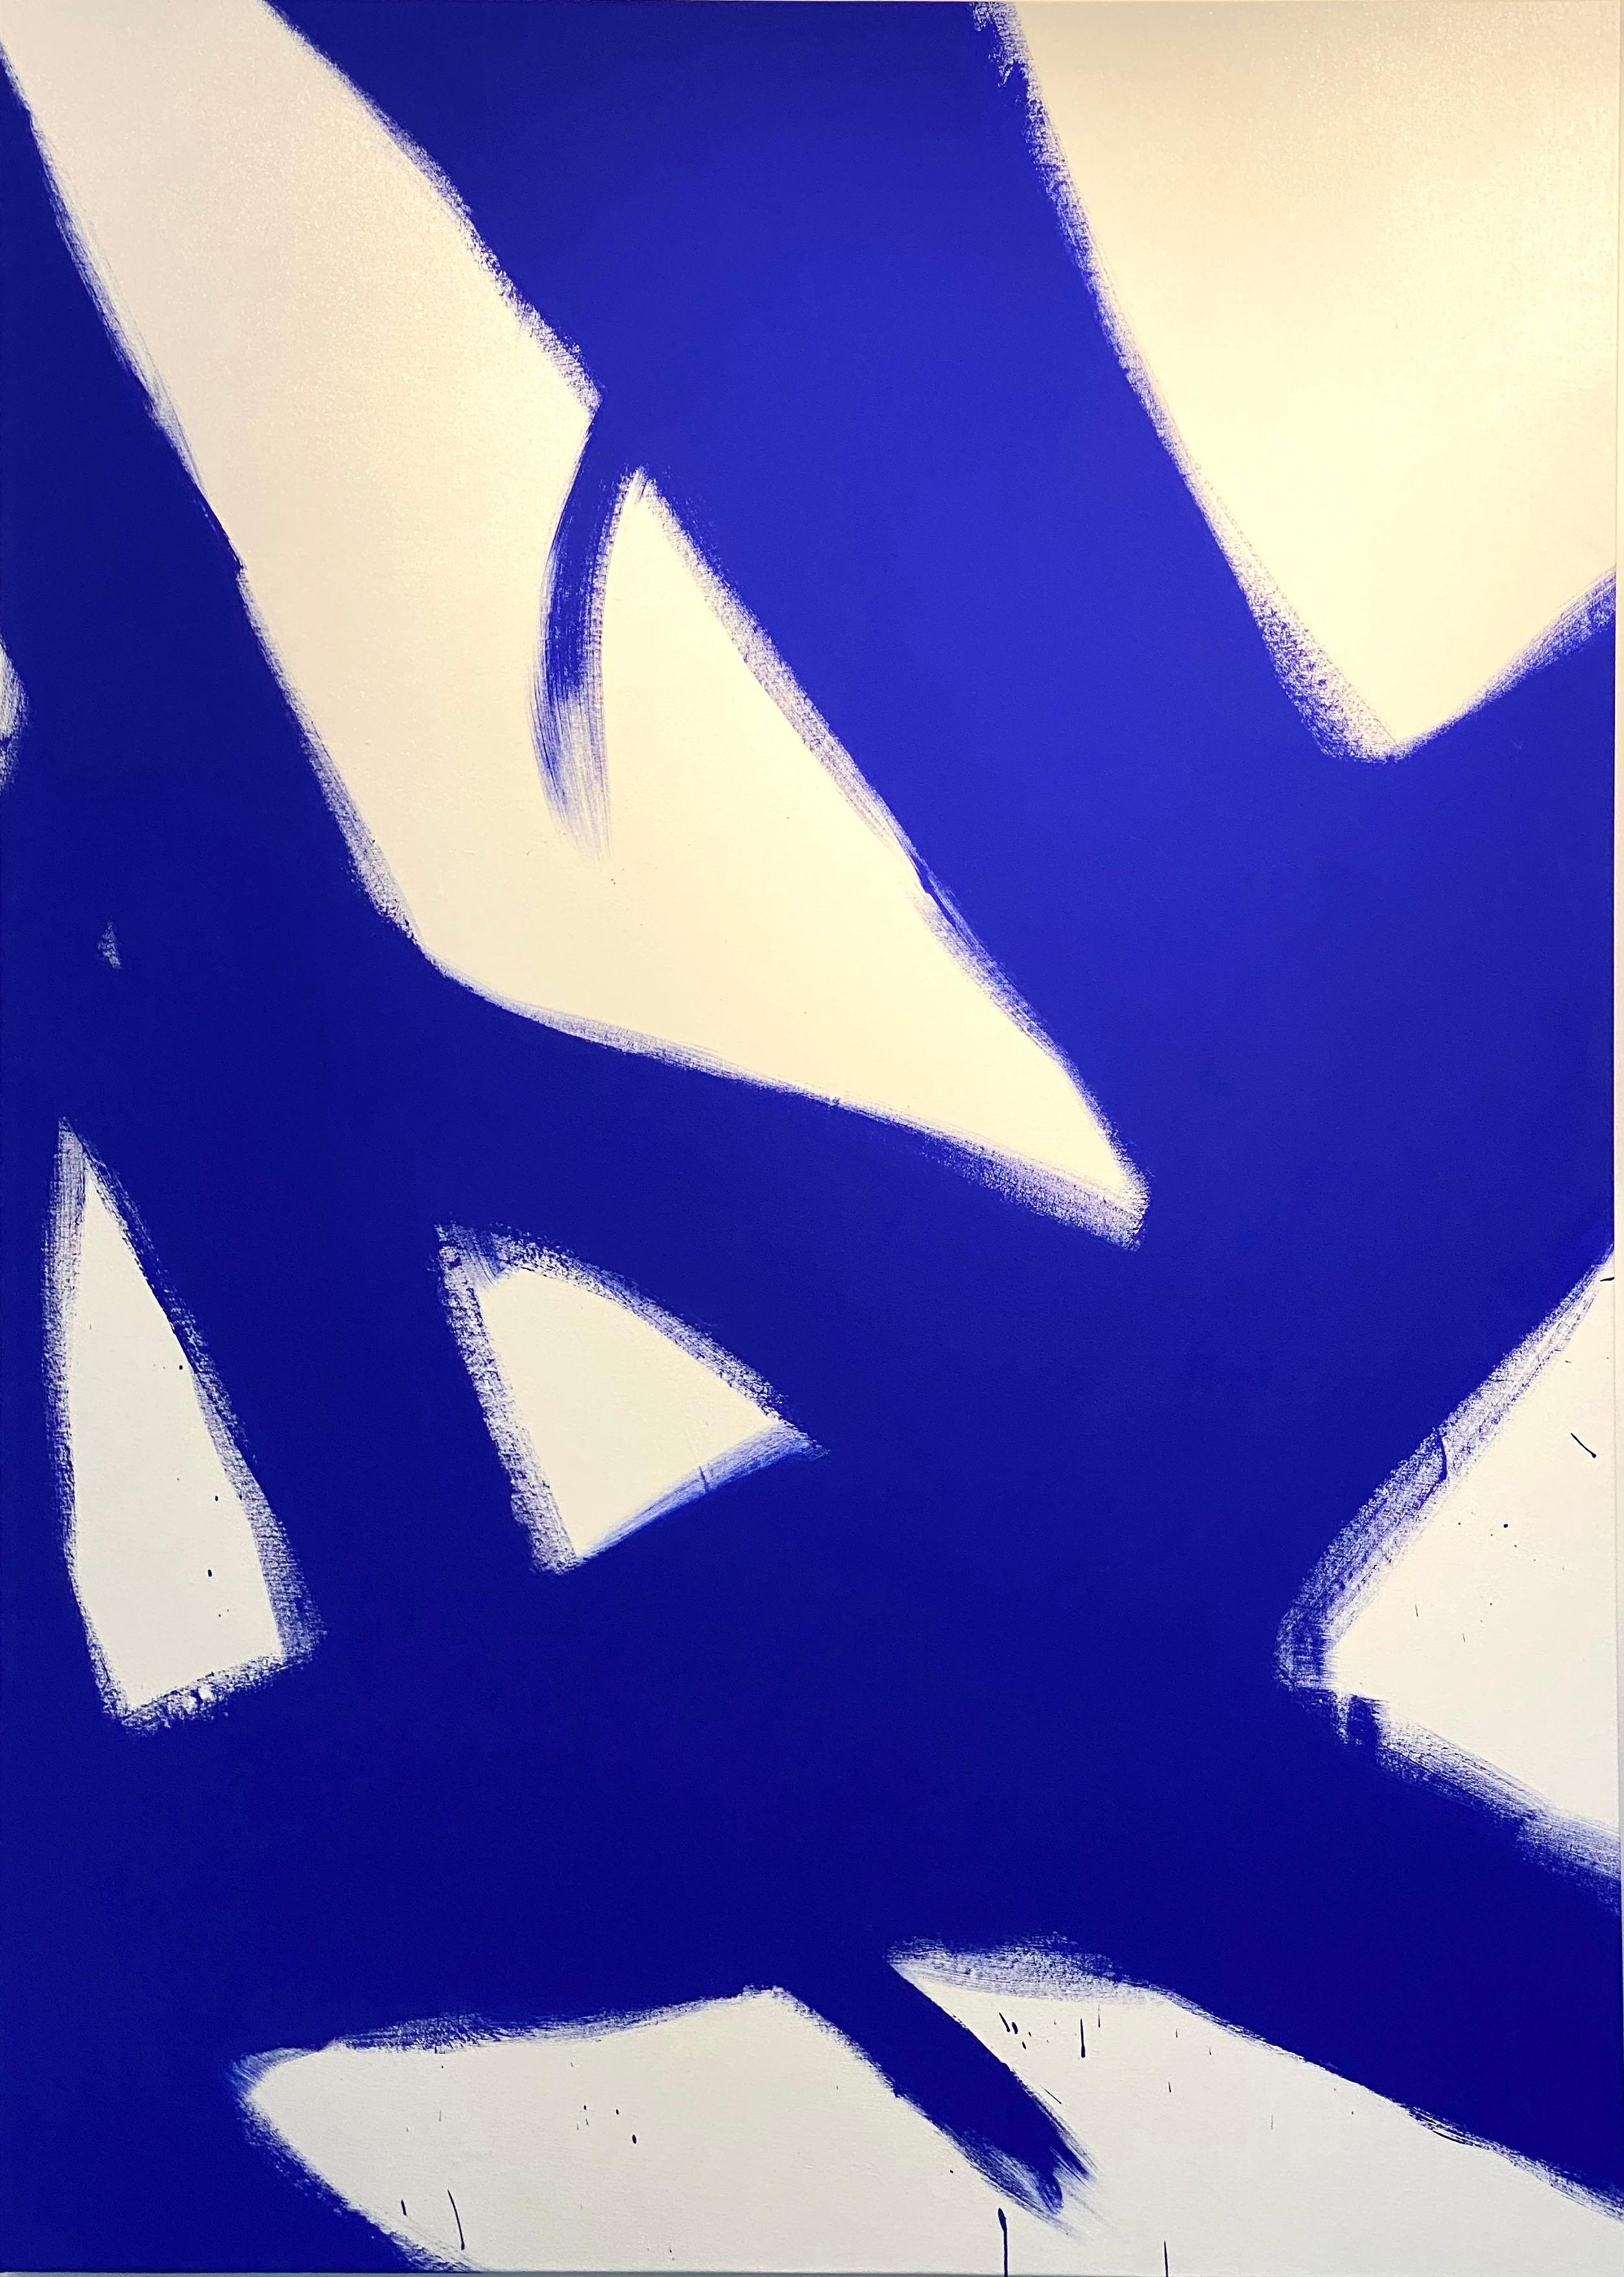 Abstract Yves klein Blue 2 - Painting by Carlos Mercado